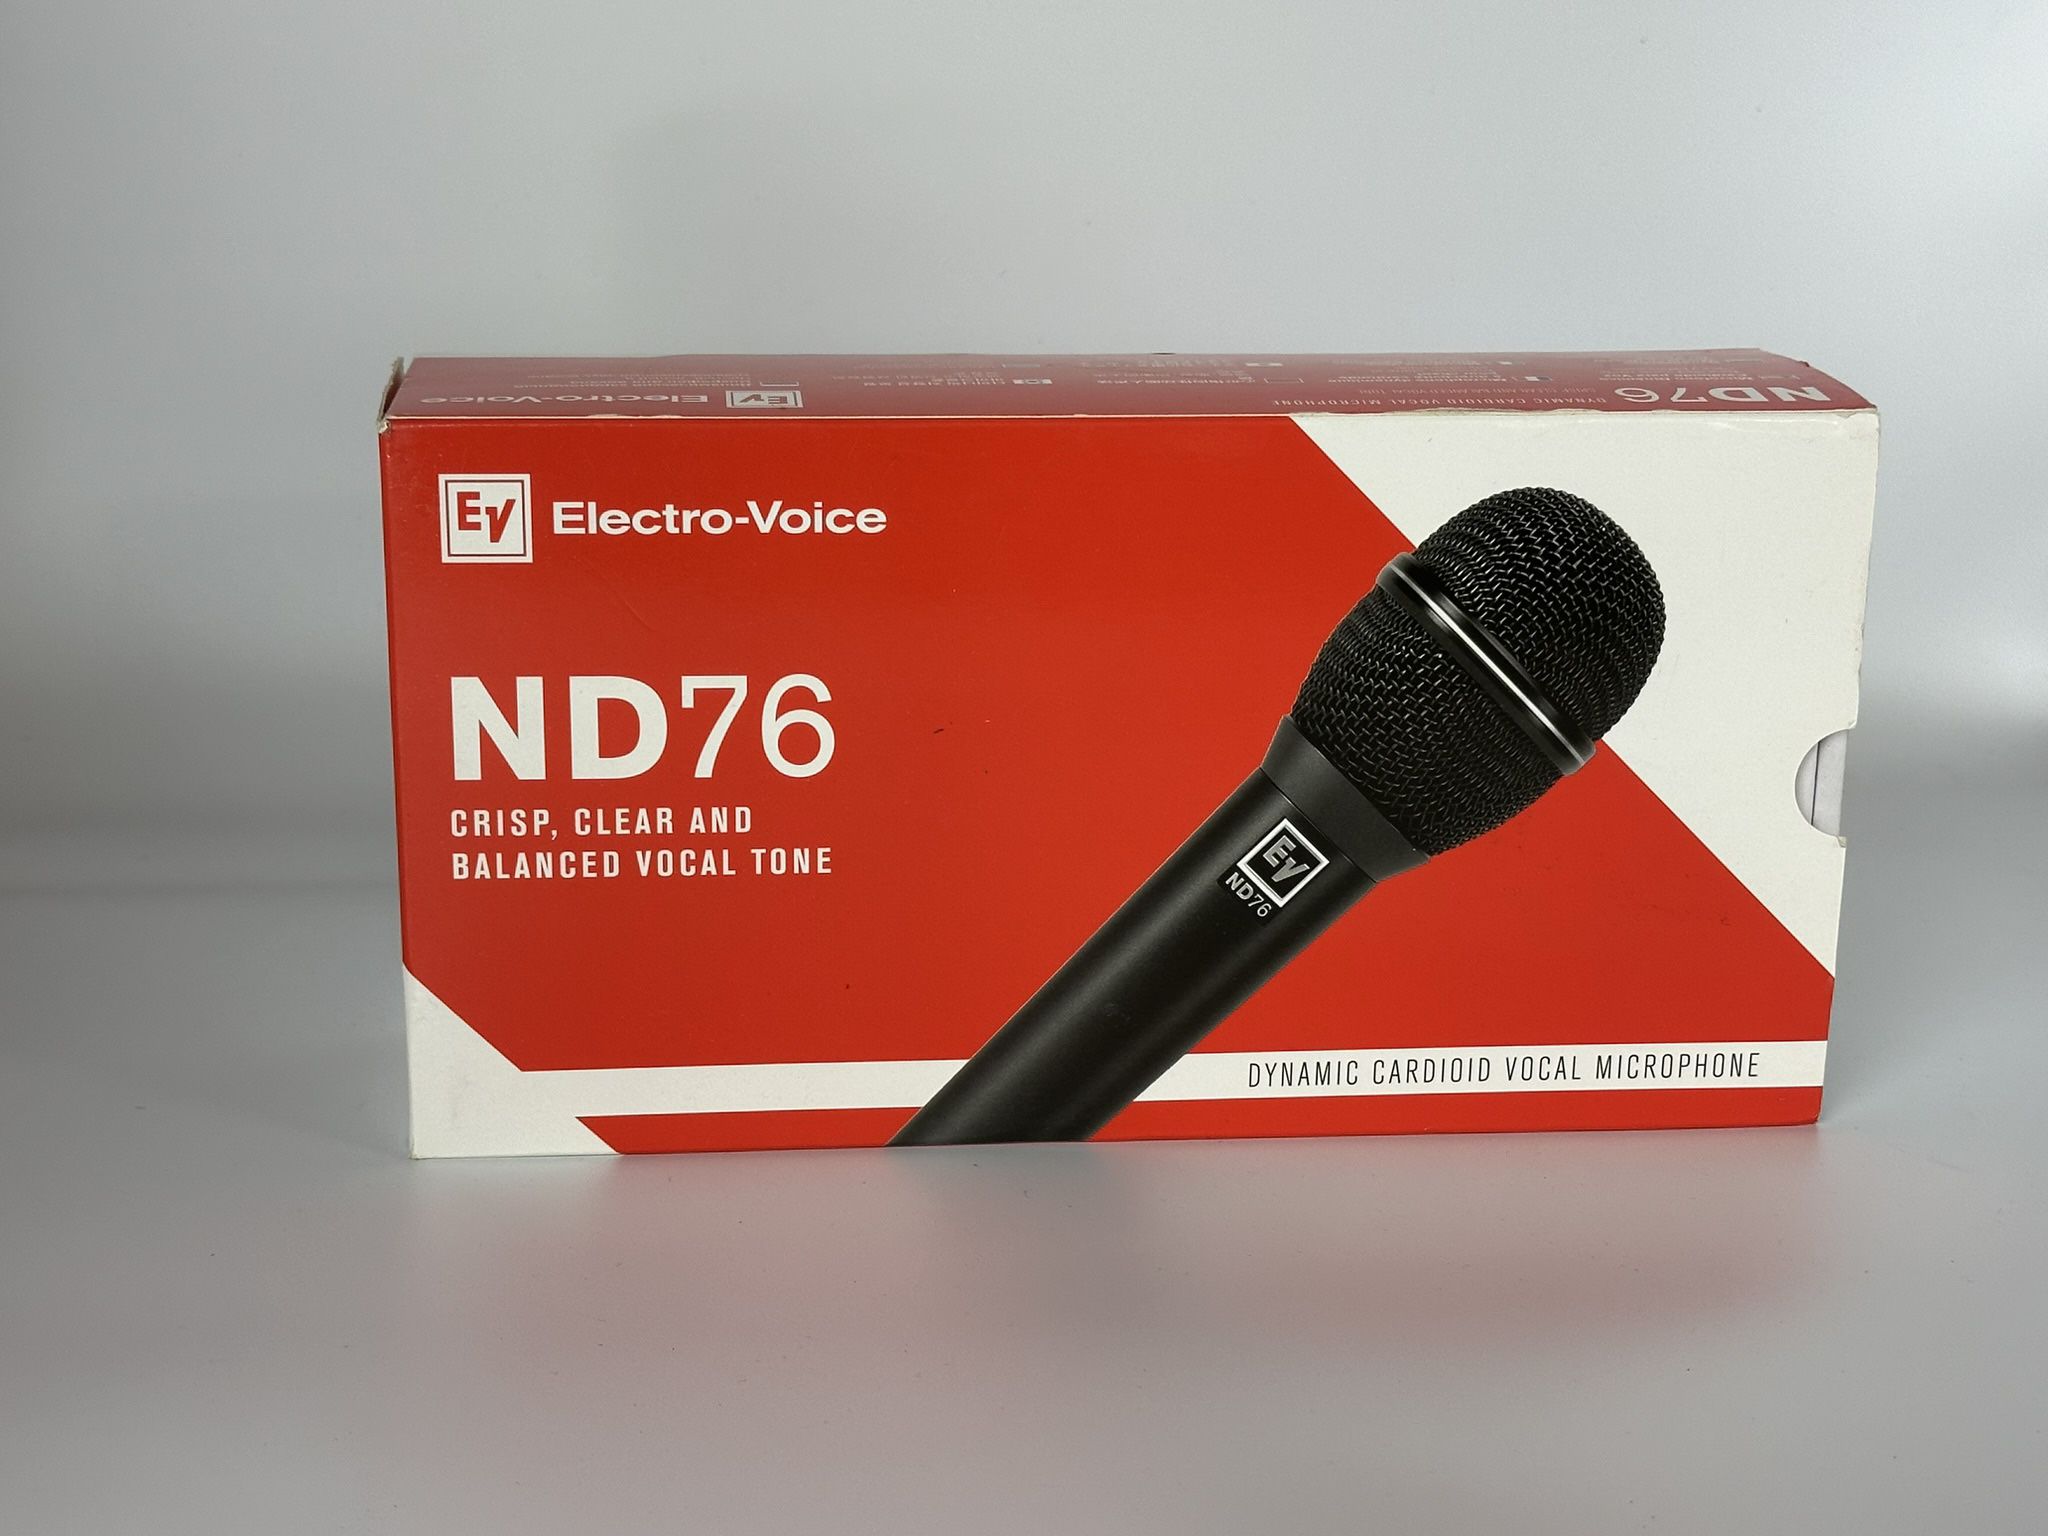 Electro-Voice ND76 Dynamic Cardioid Vocal Microphone 